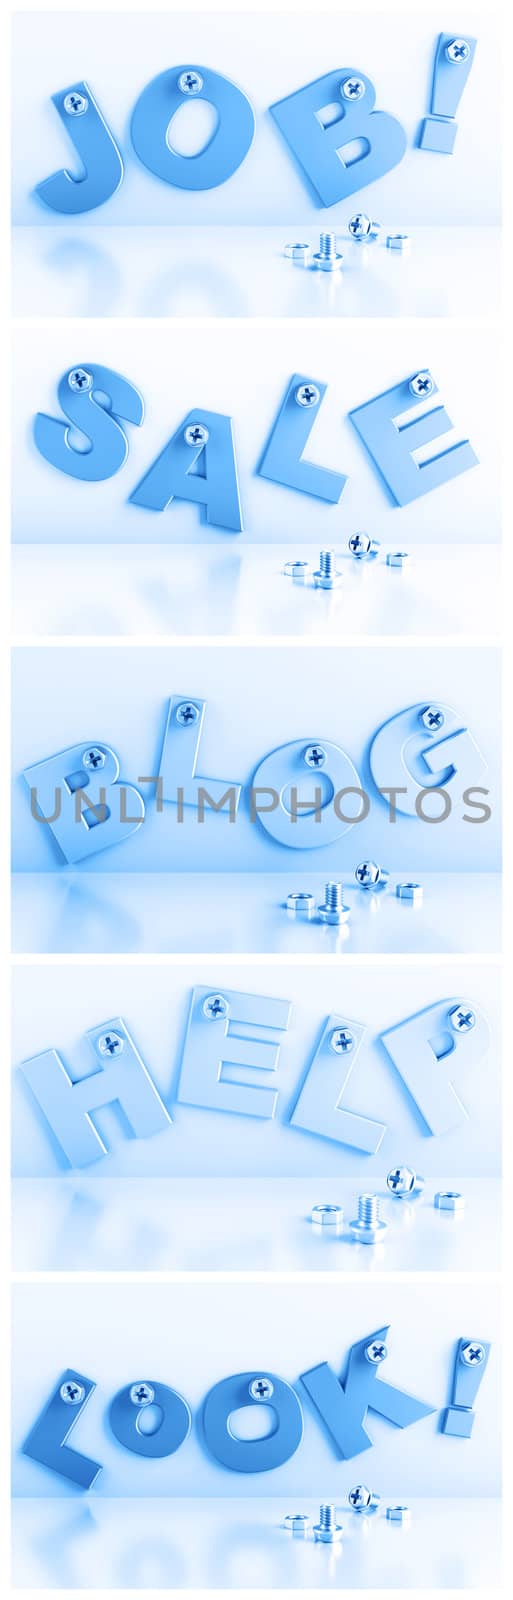 words attached with bolts on a white background by Serp